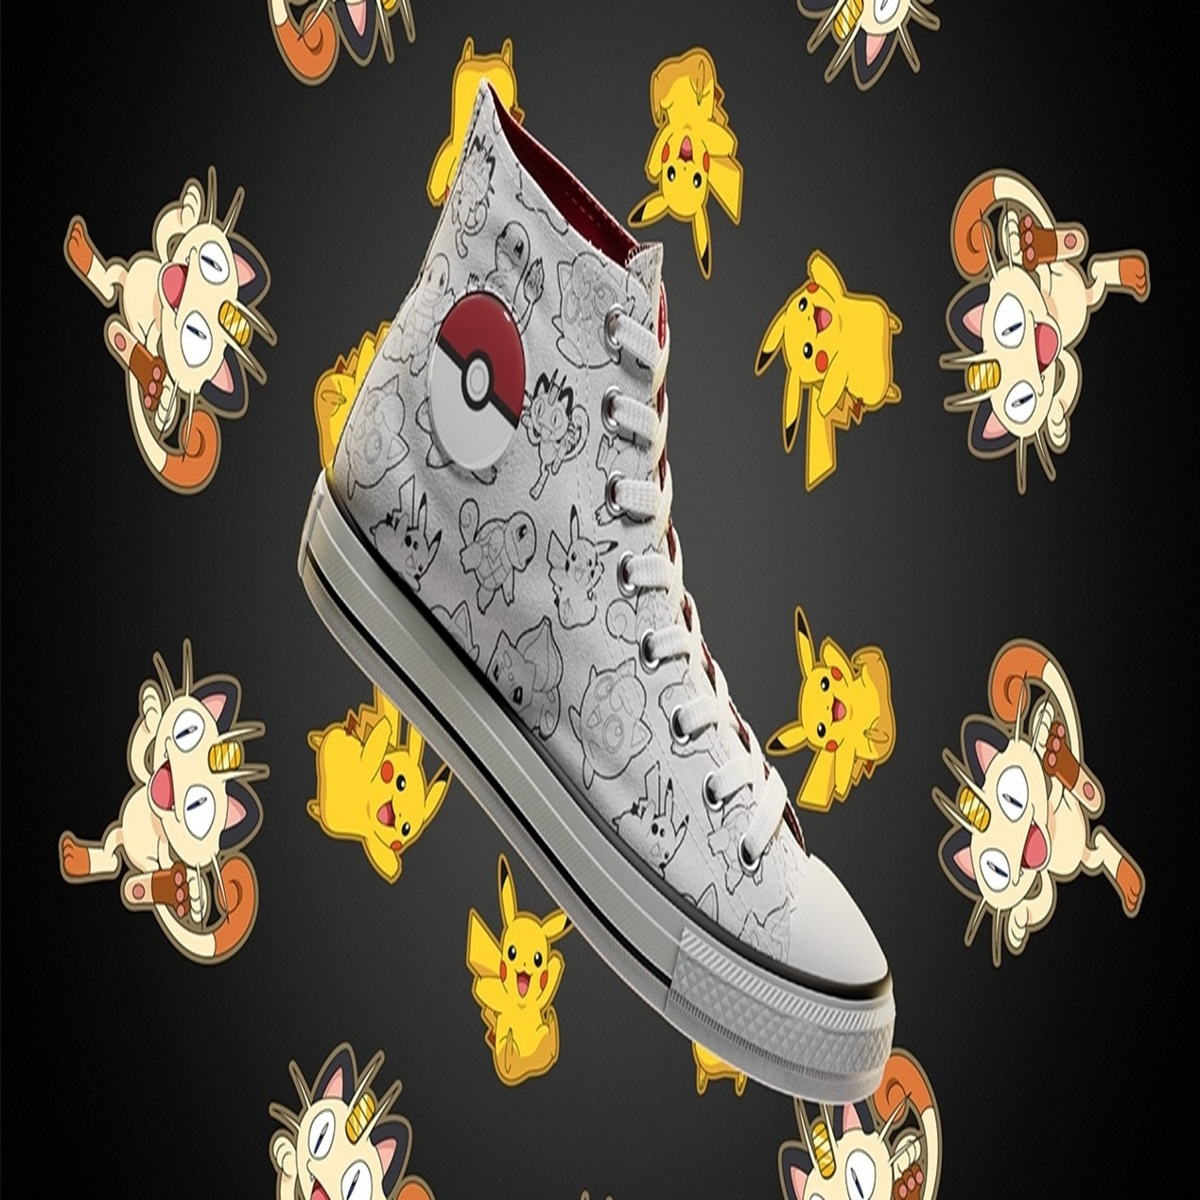 Pokémon teams up with Converse for sneaker range |